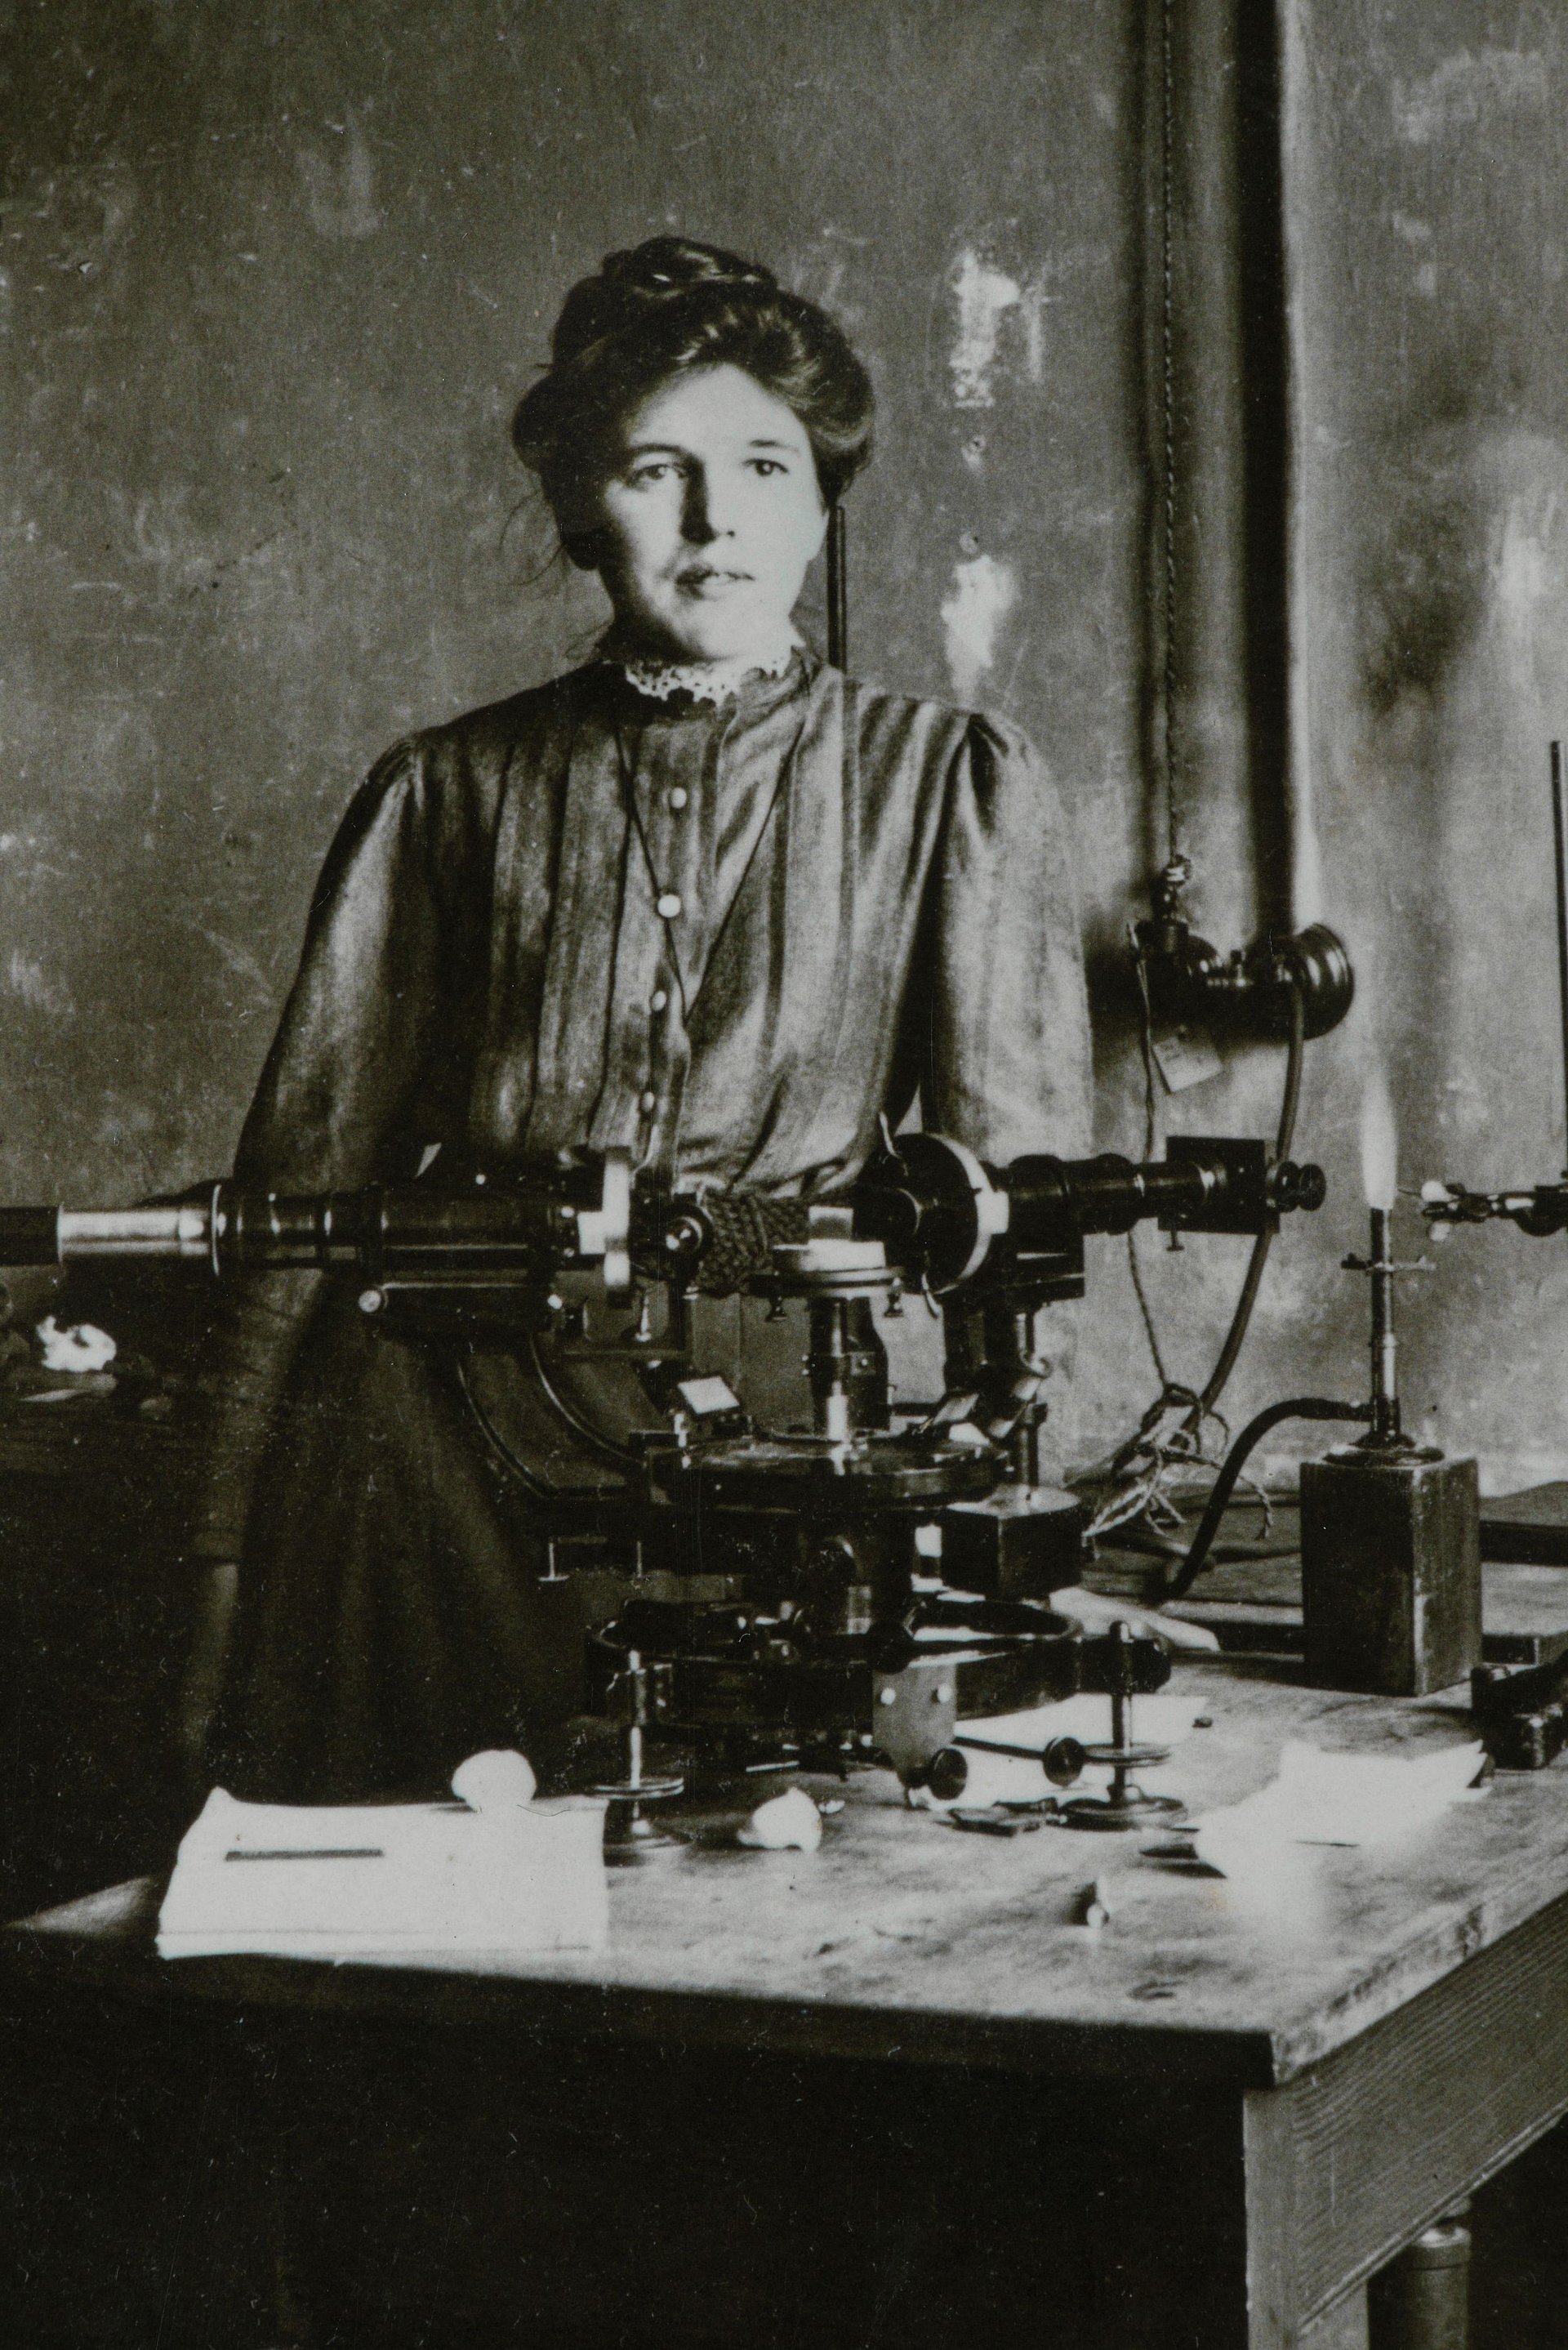 Anna Helene Koch (1881 - 1920, née Boyksen), the first student of electrical engineering at THM at the spectral apparatus in the physics practical course, around 1908.